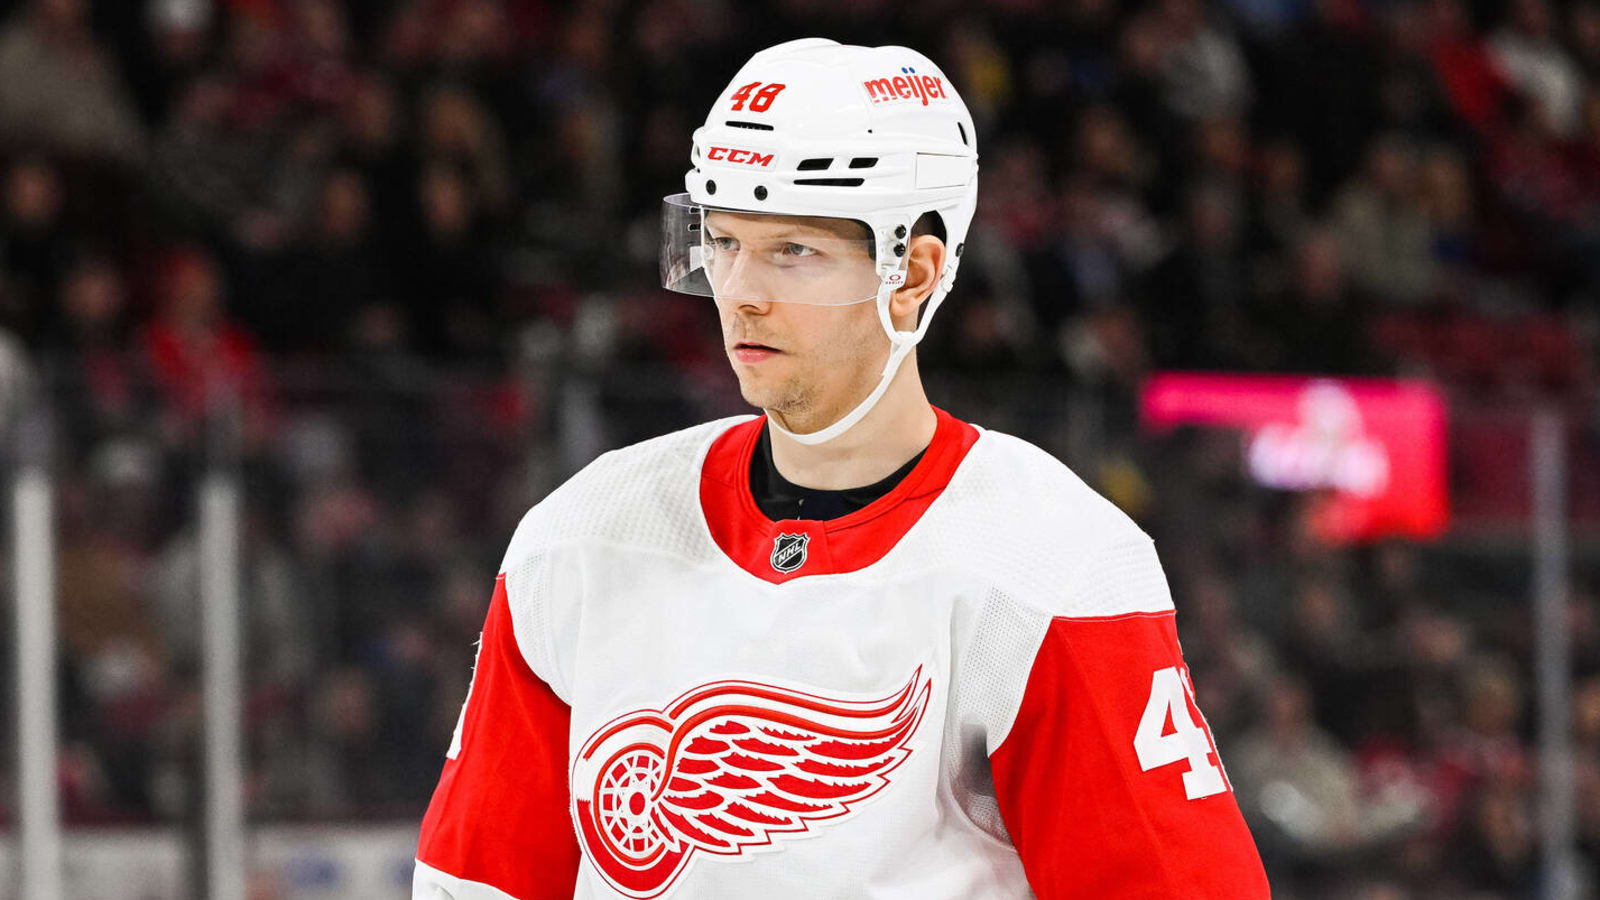 Bruins sign former Red Wings forward to PTO